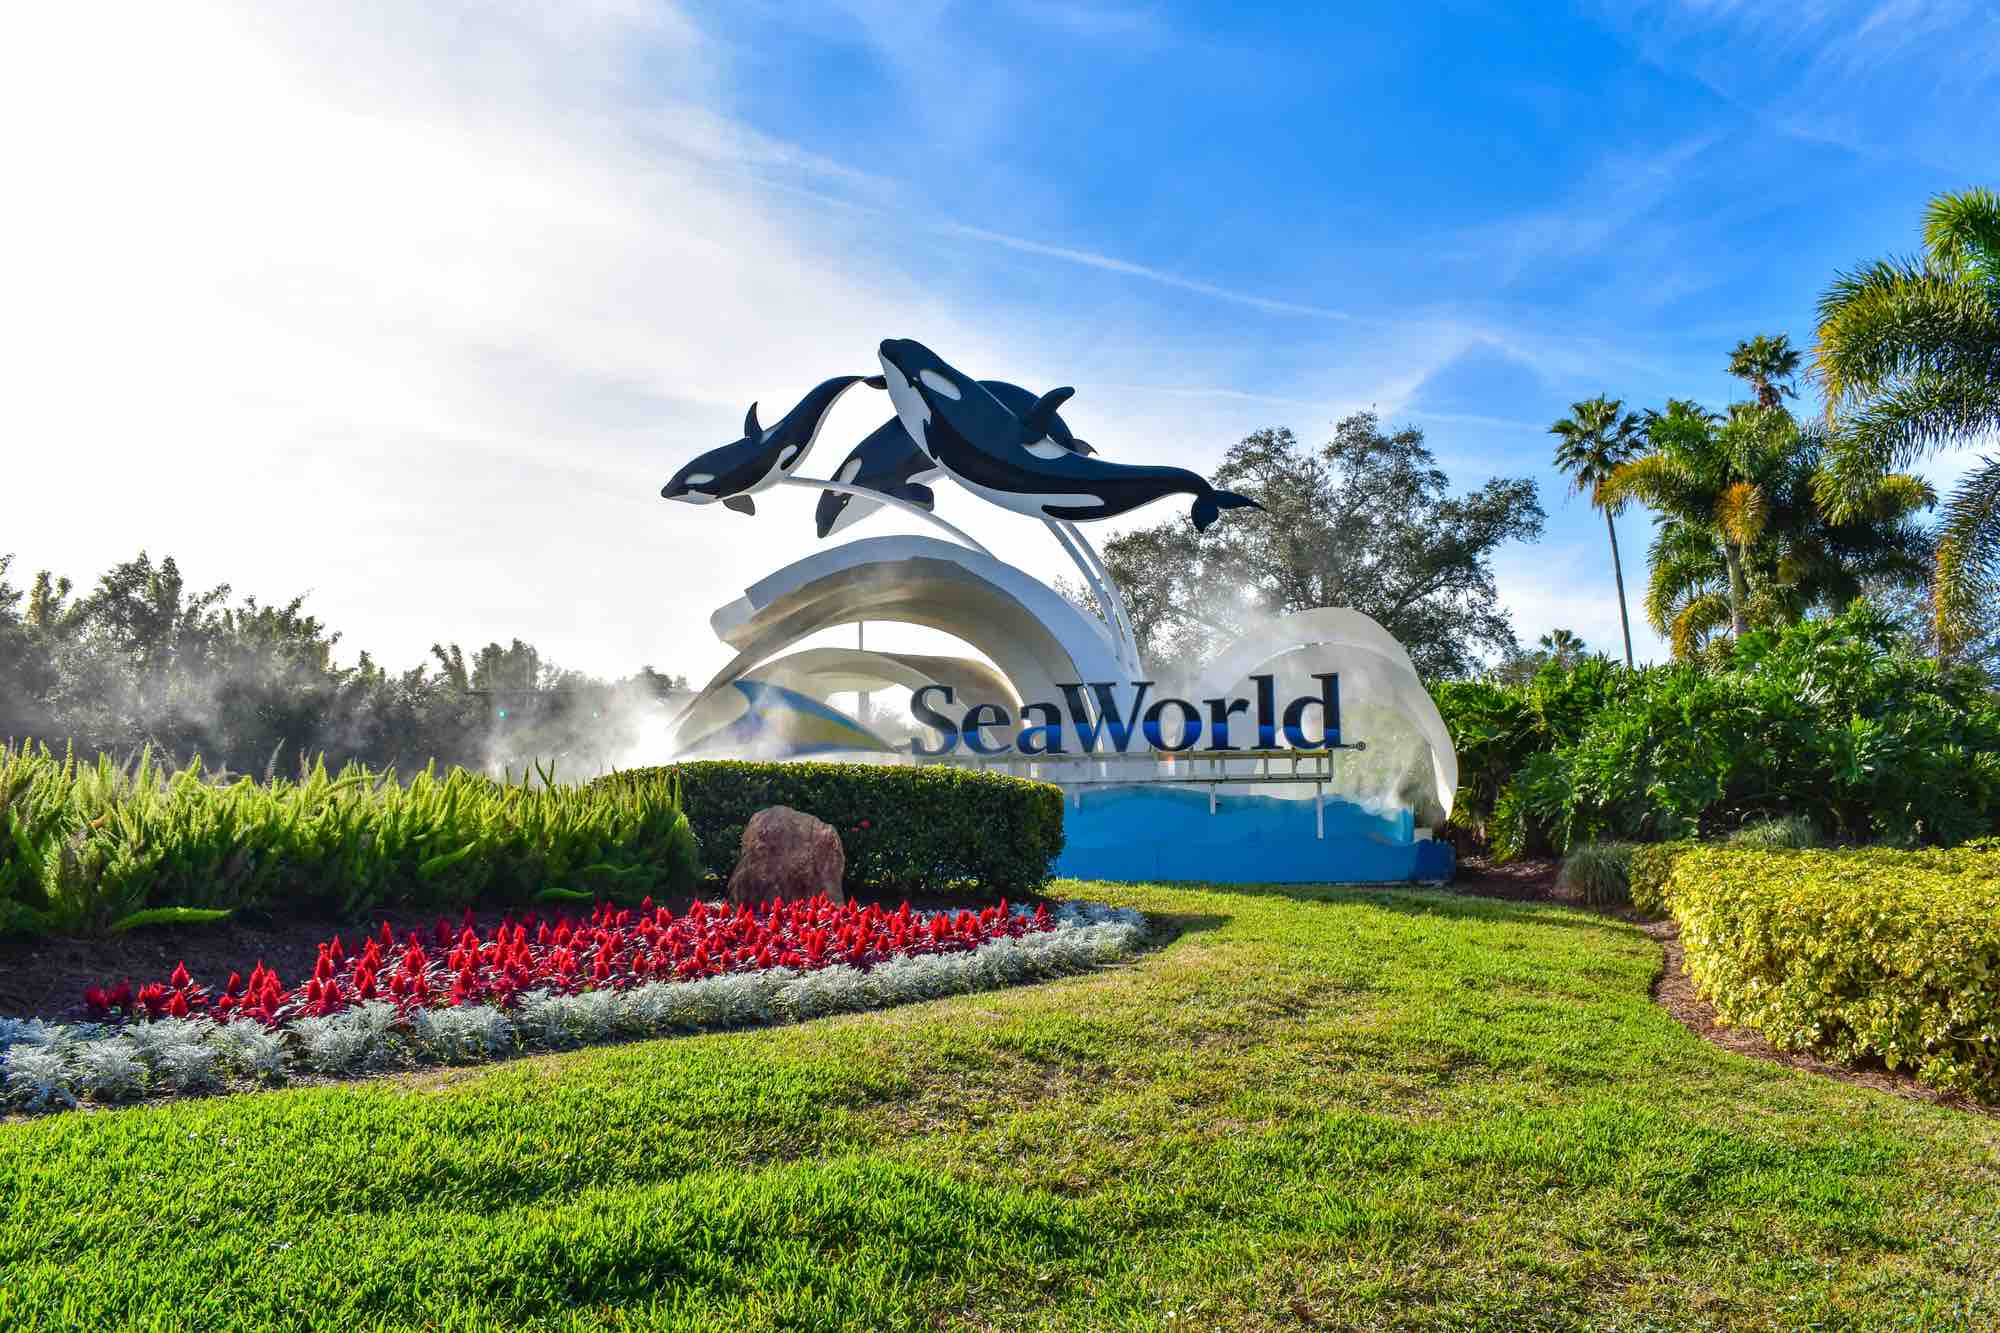 Military Free tickets to SeaWorld available again